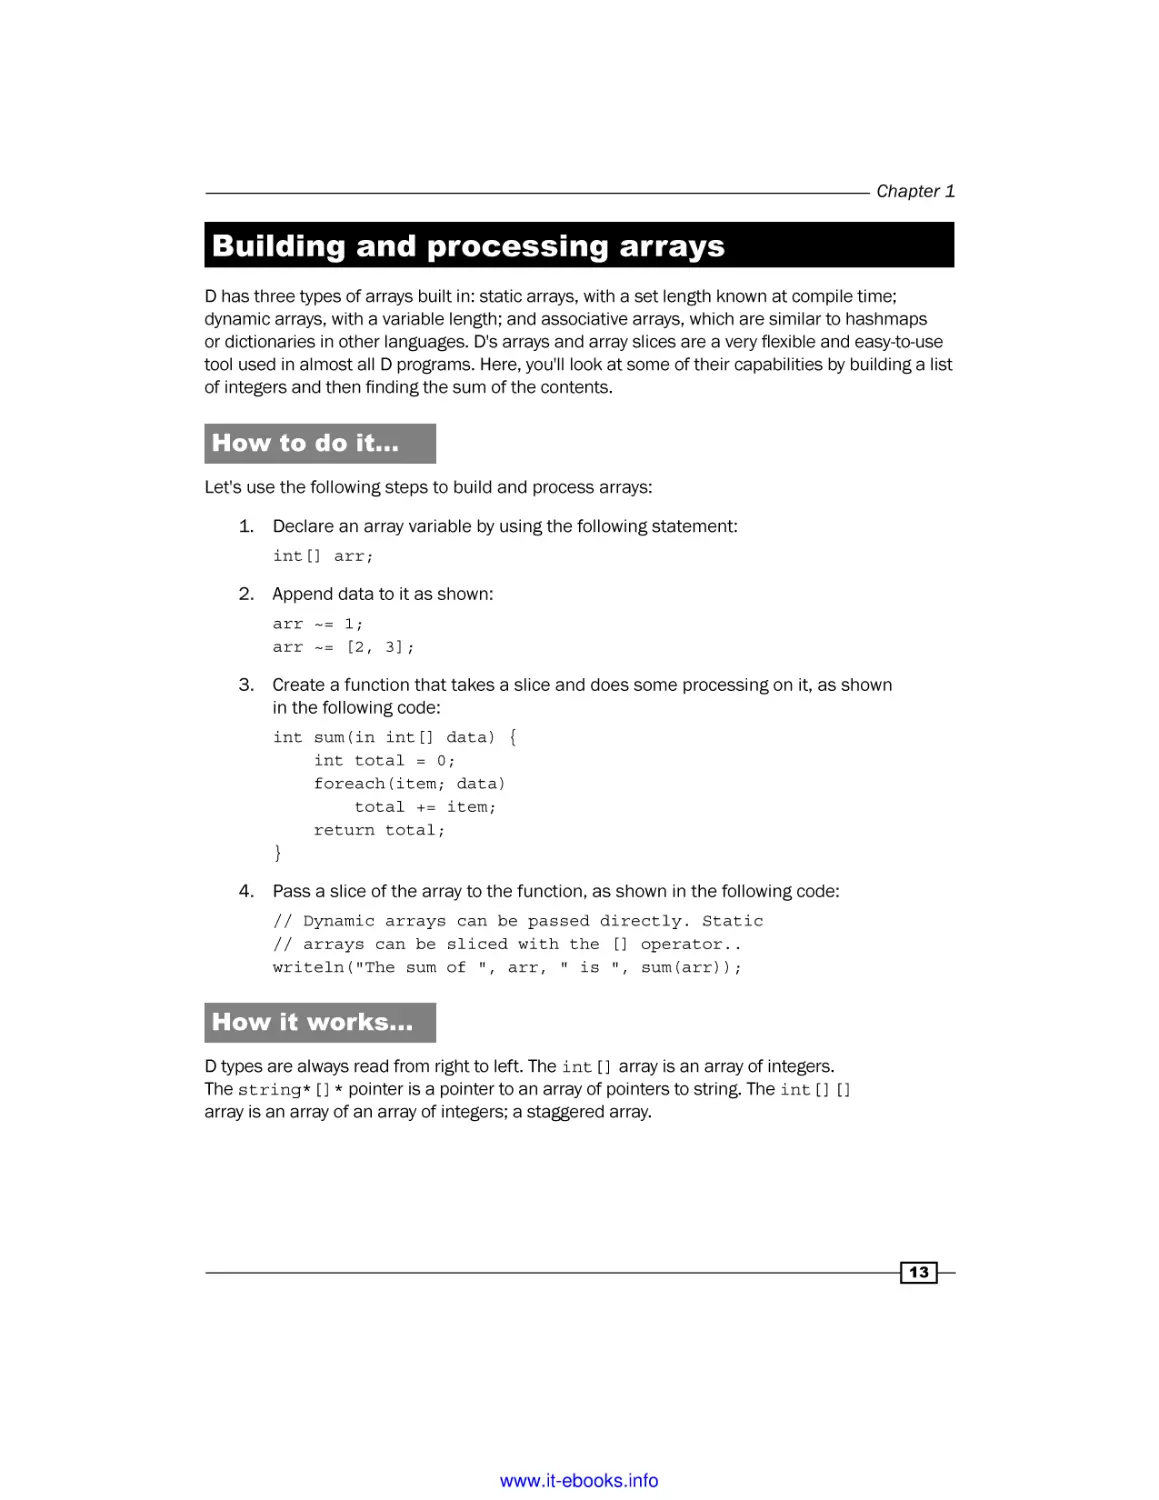 Building and processing arrays